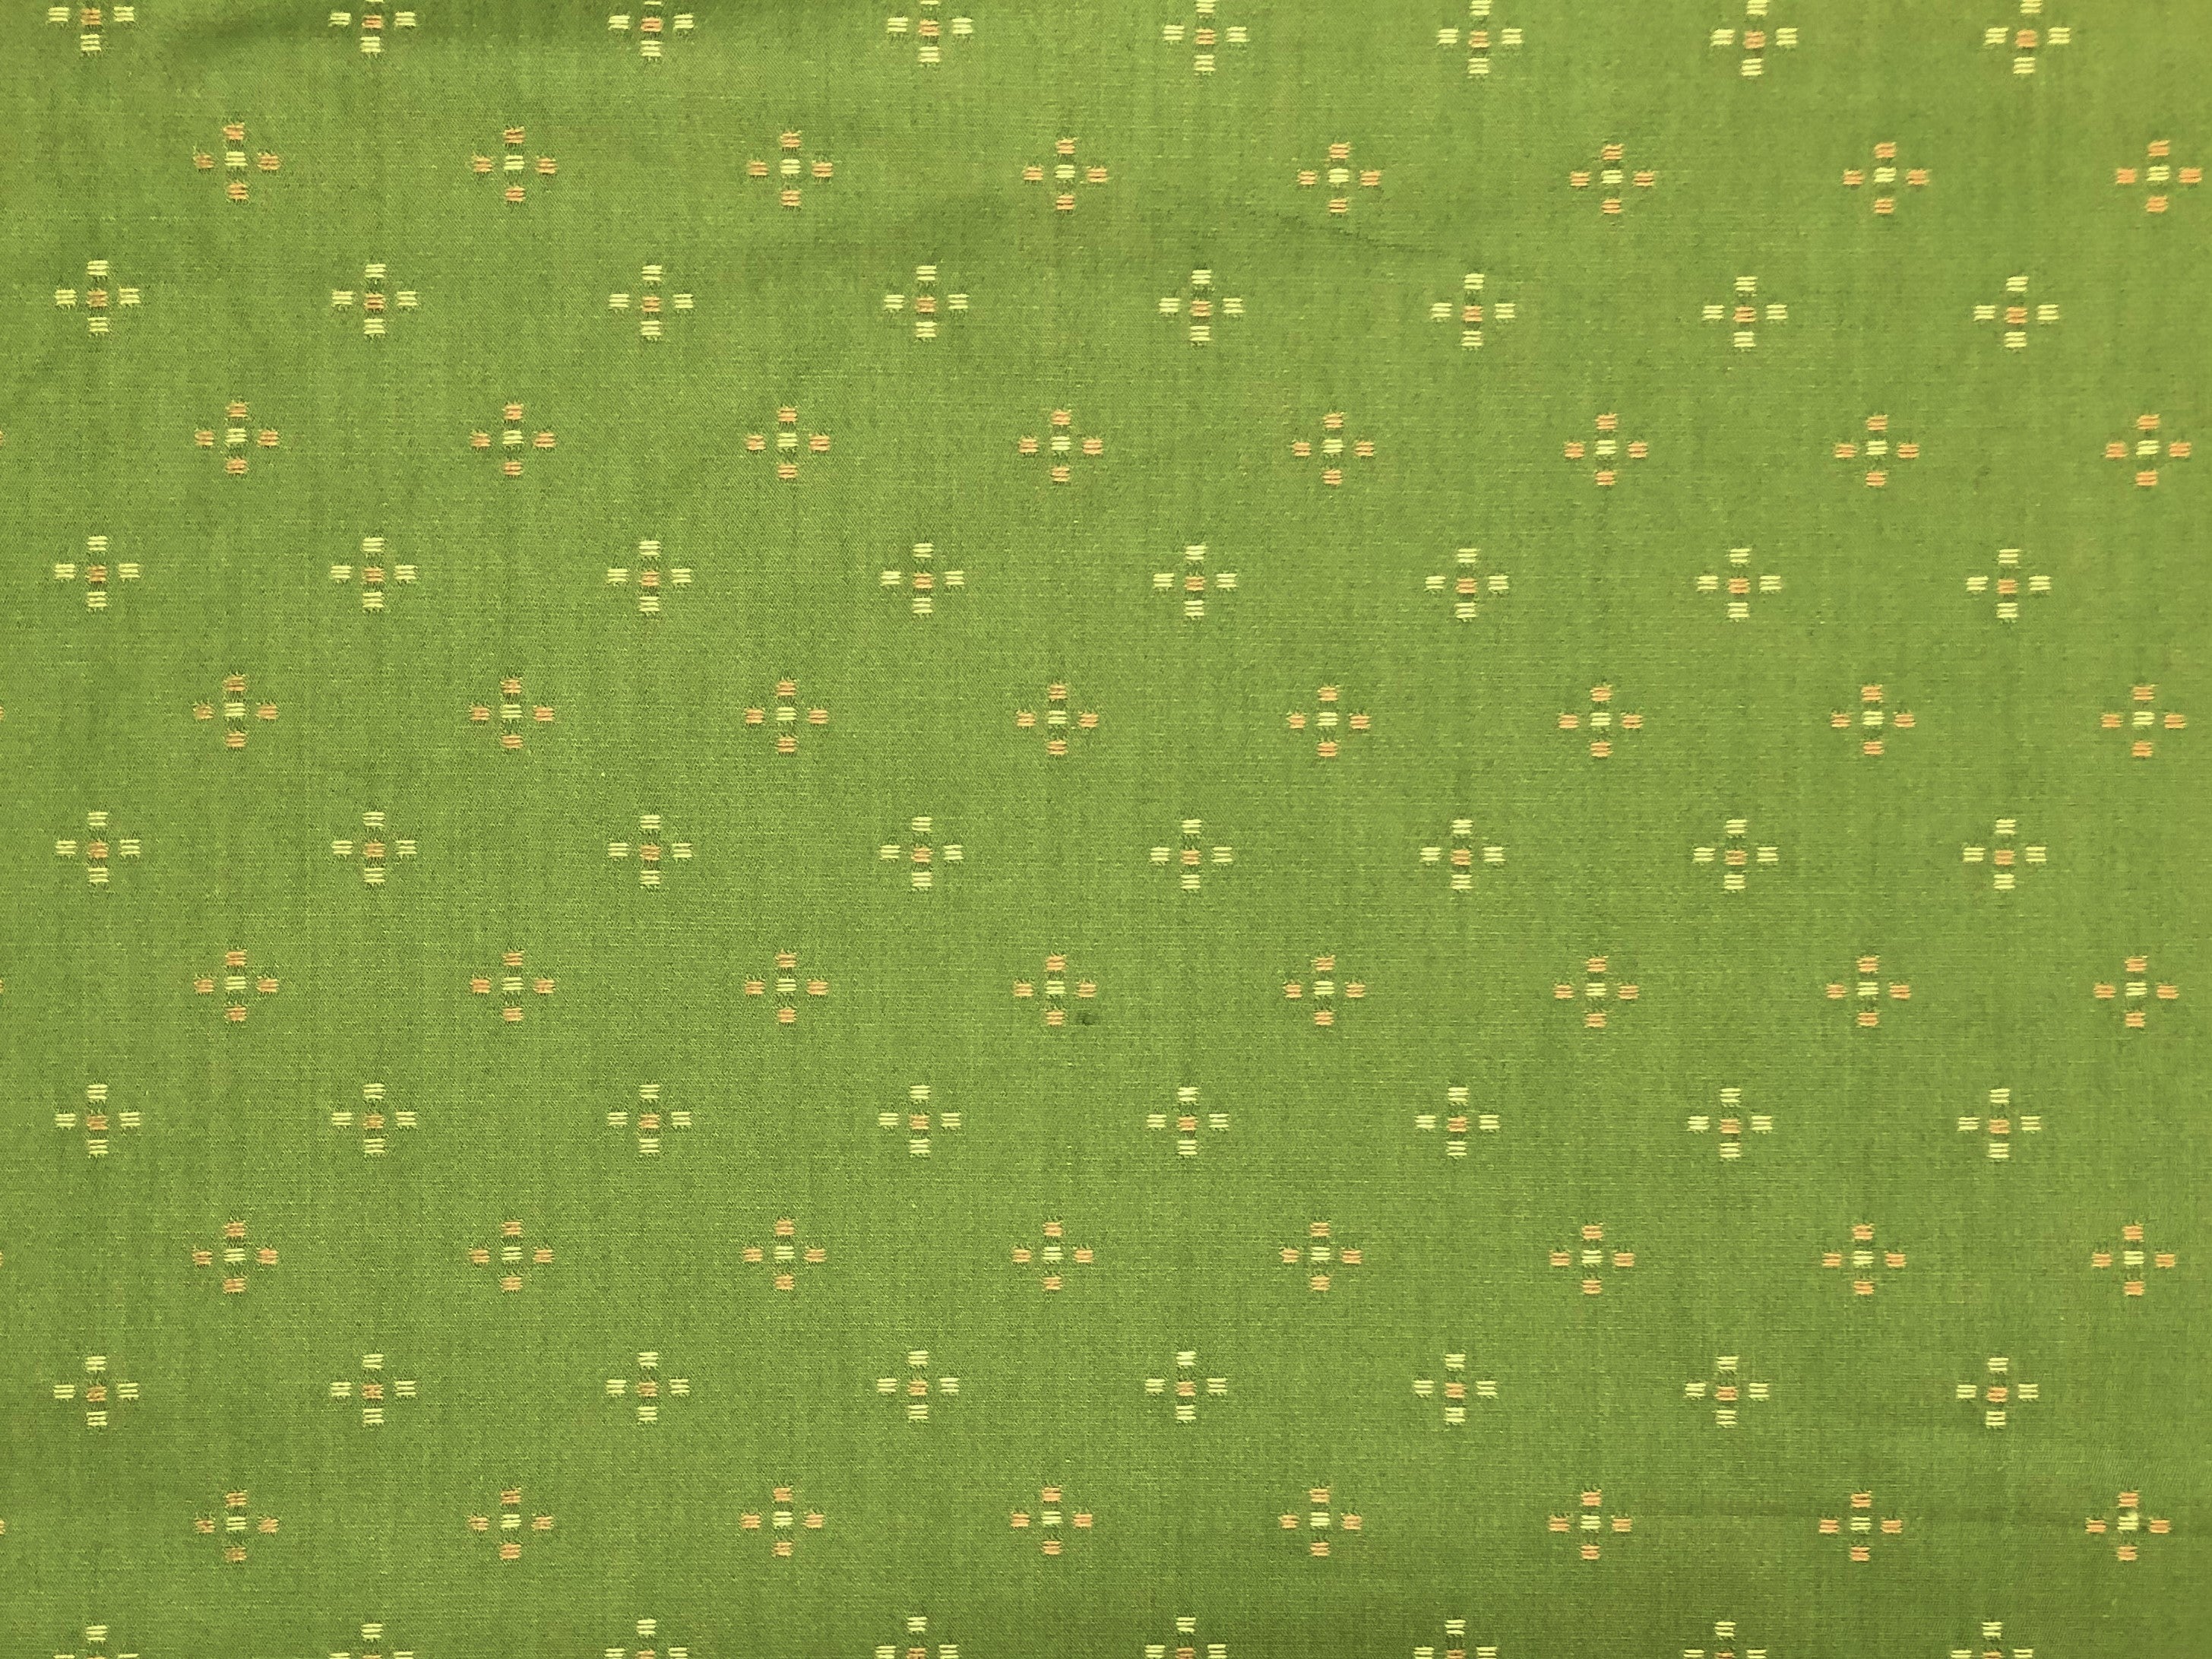 LV305-GR12 Sweet Floral Scent - Haystack - Green Fabric